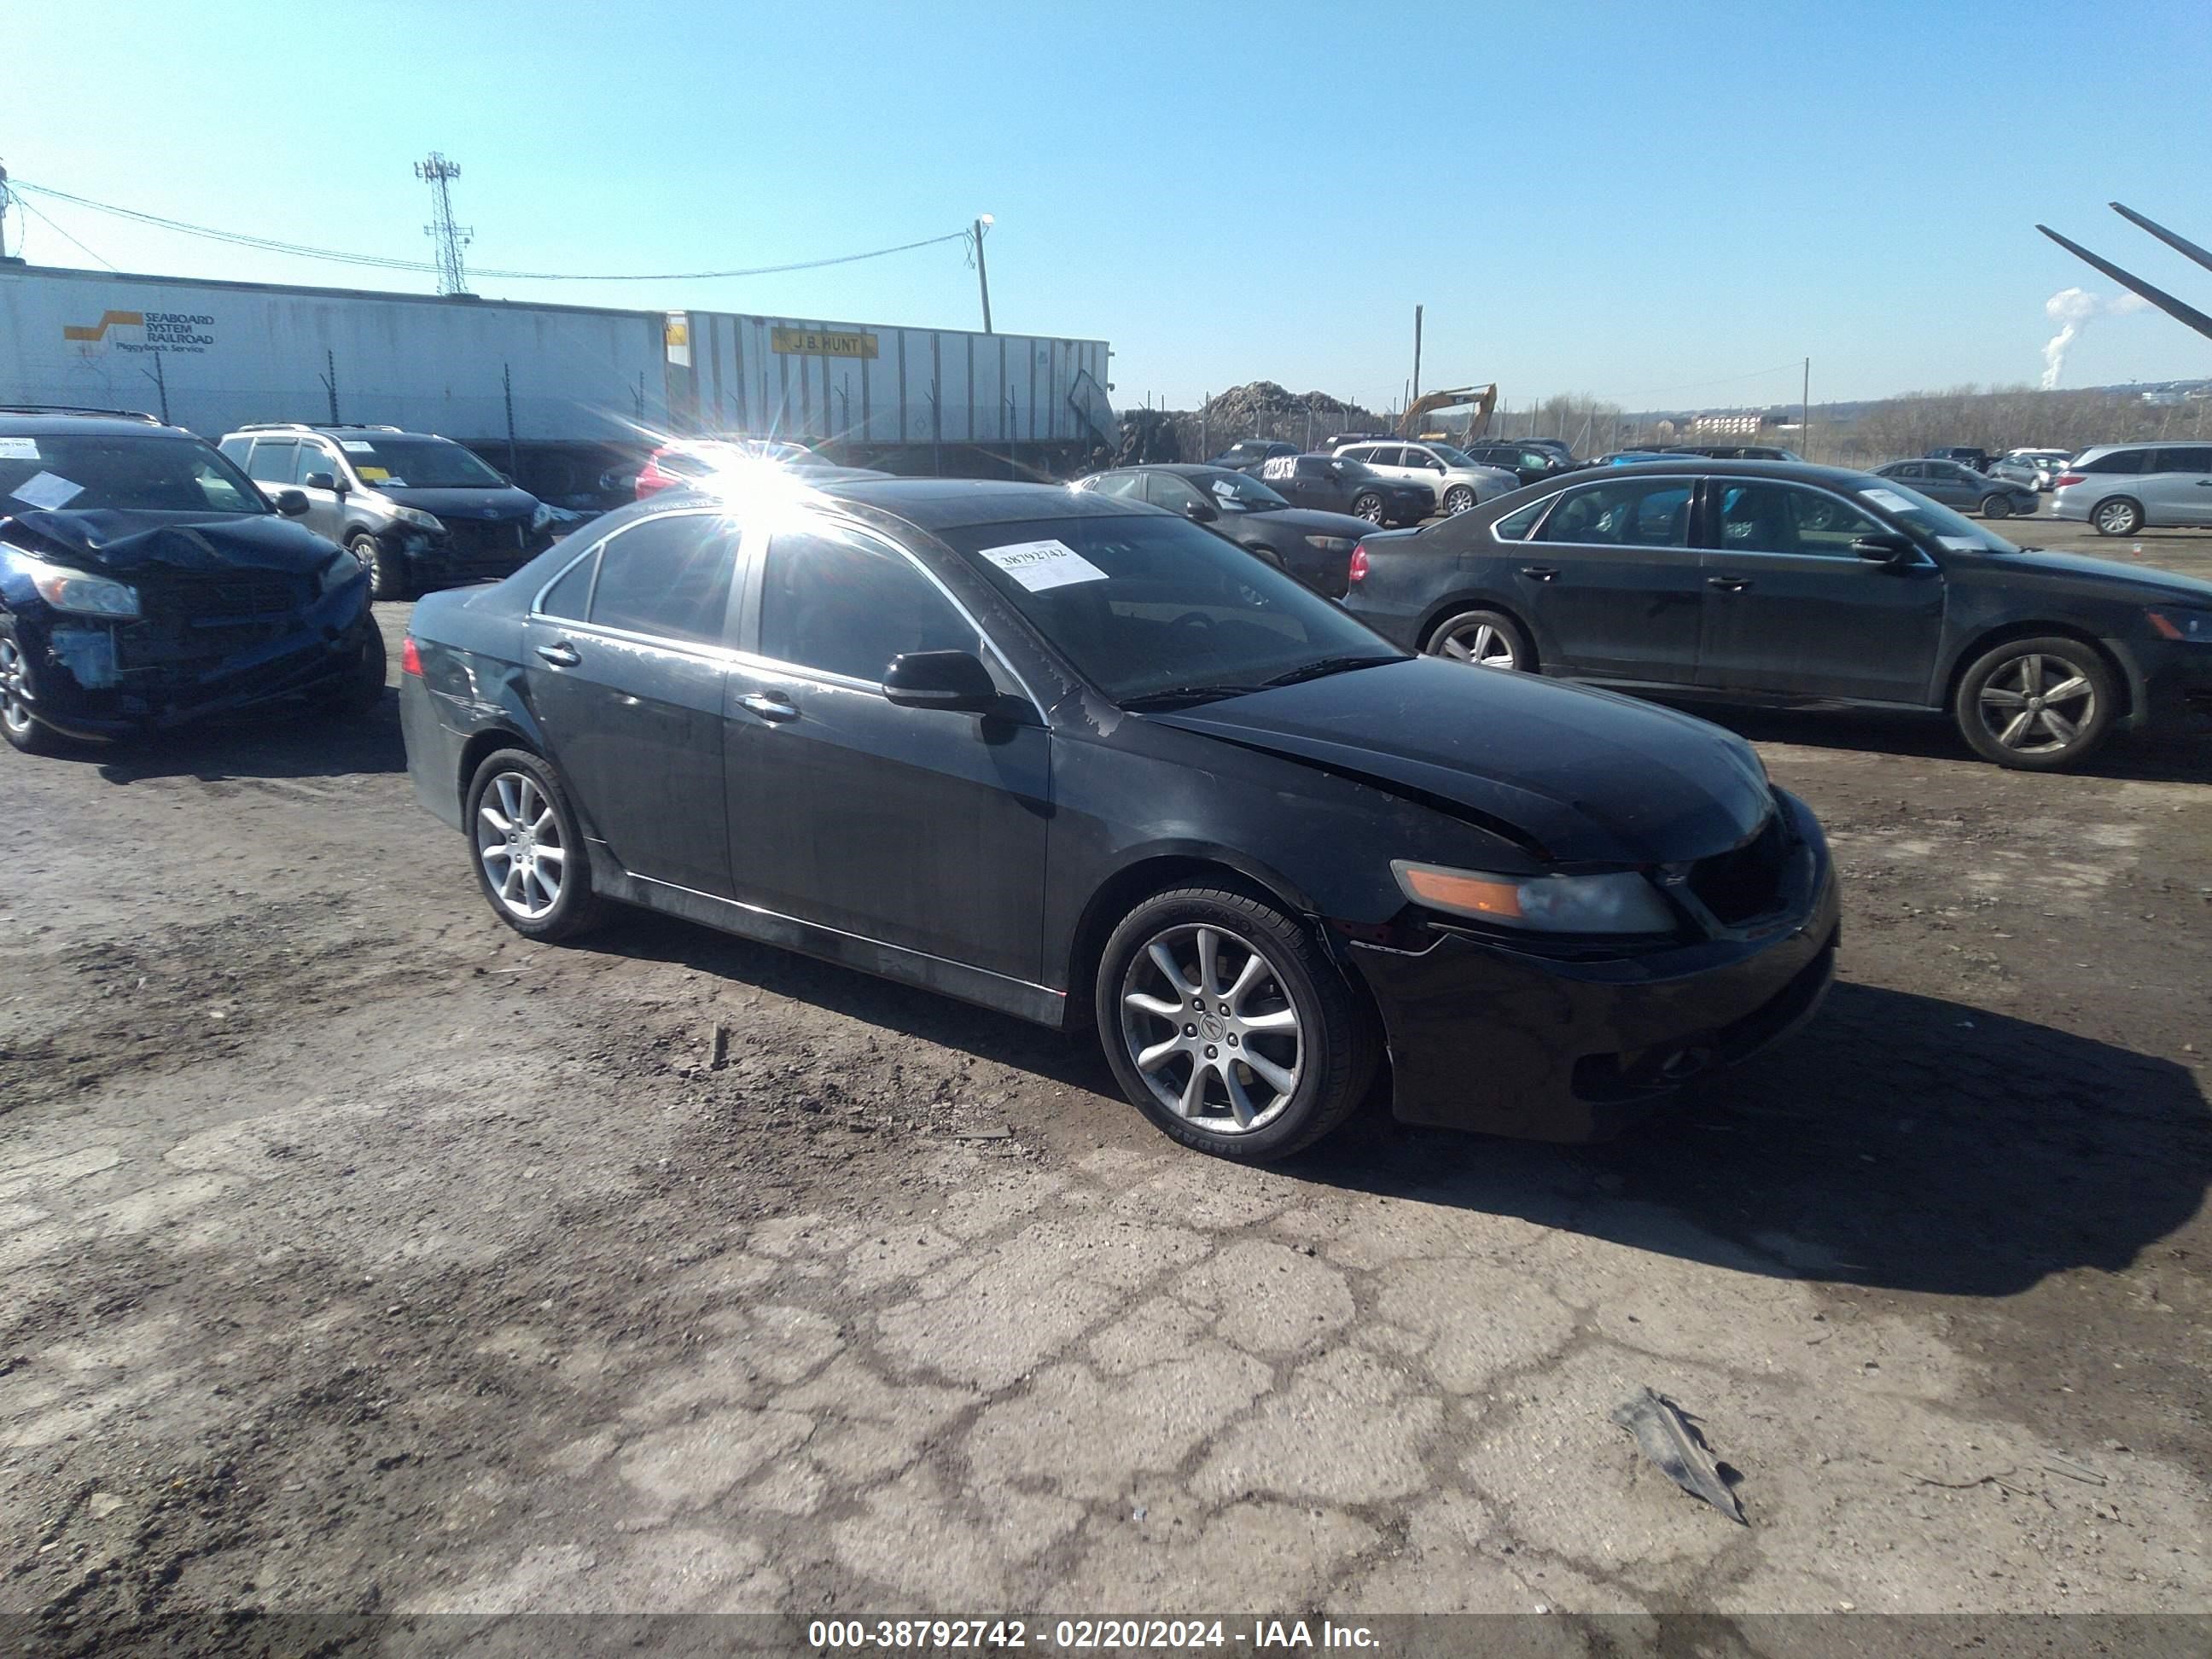 vin: JH4CL96826C019435 JH4CL96826C019435 2006 acura tsx 2400 for Sale in 19428, 100 Industrial Way, Conshohocken, Pennsylvania, USA